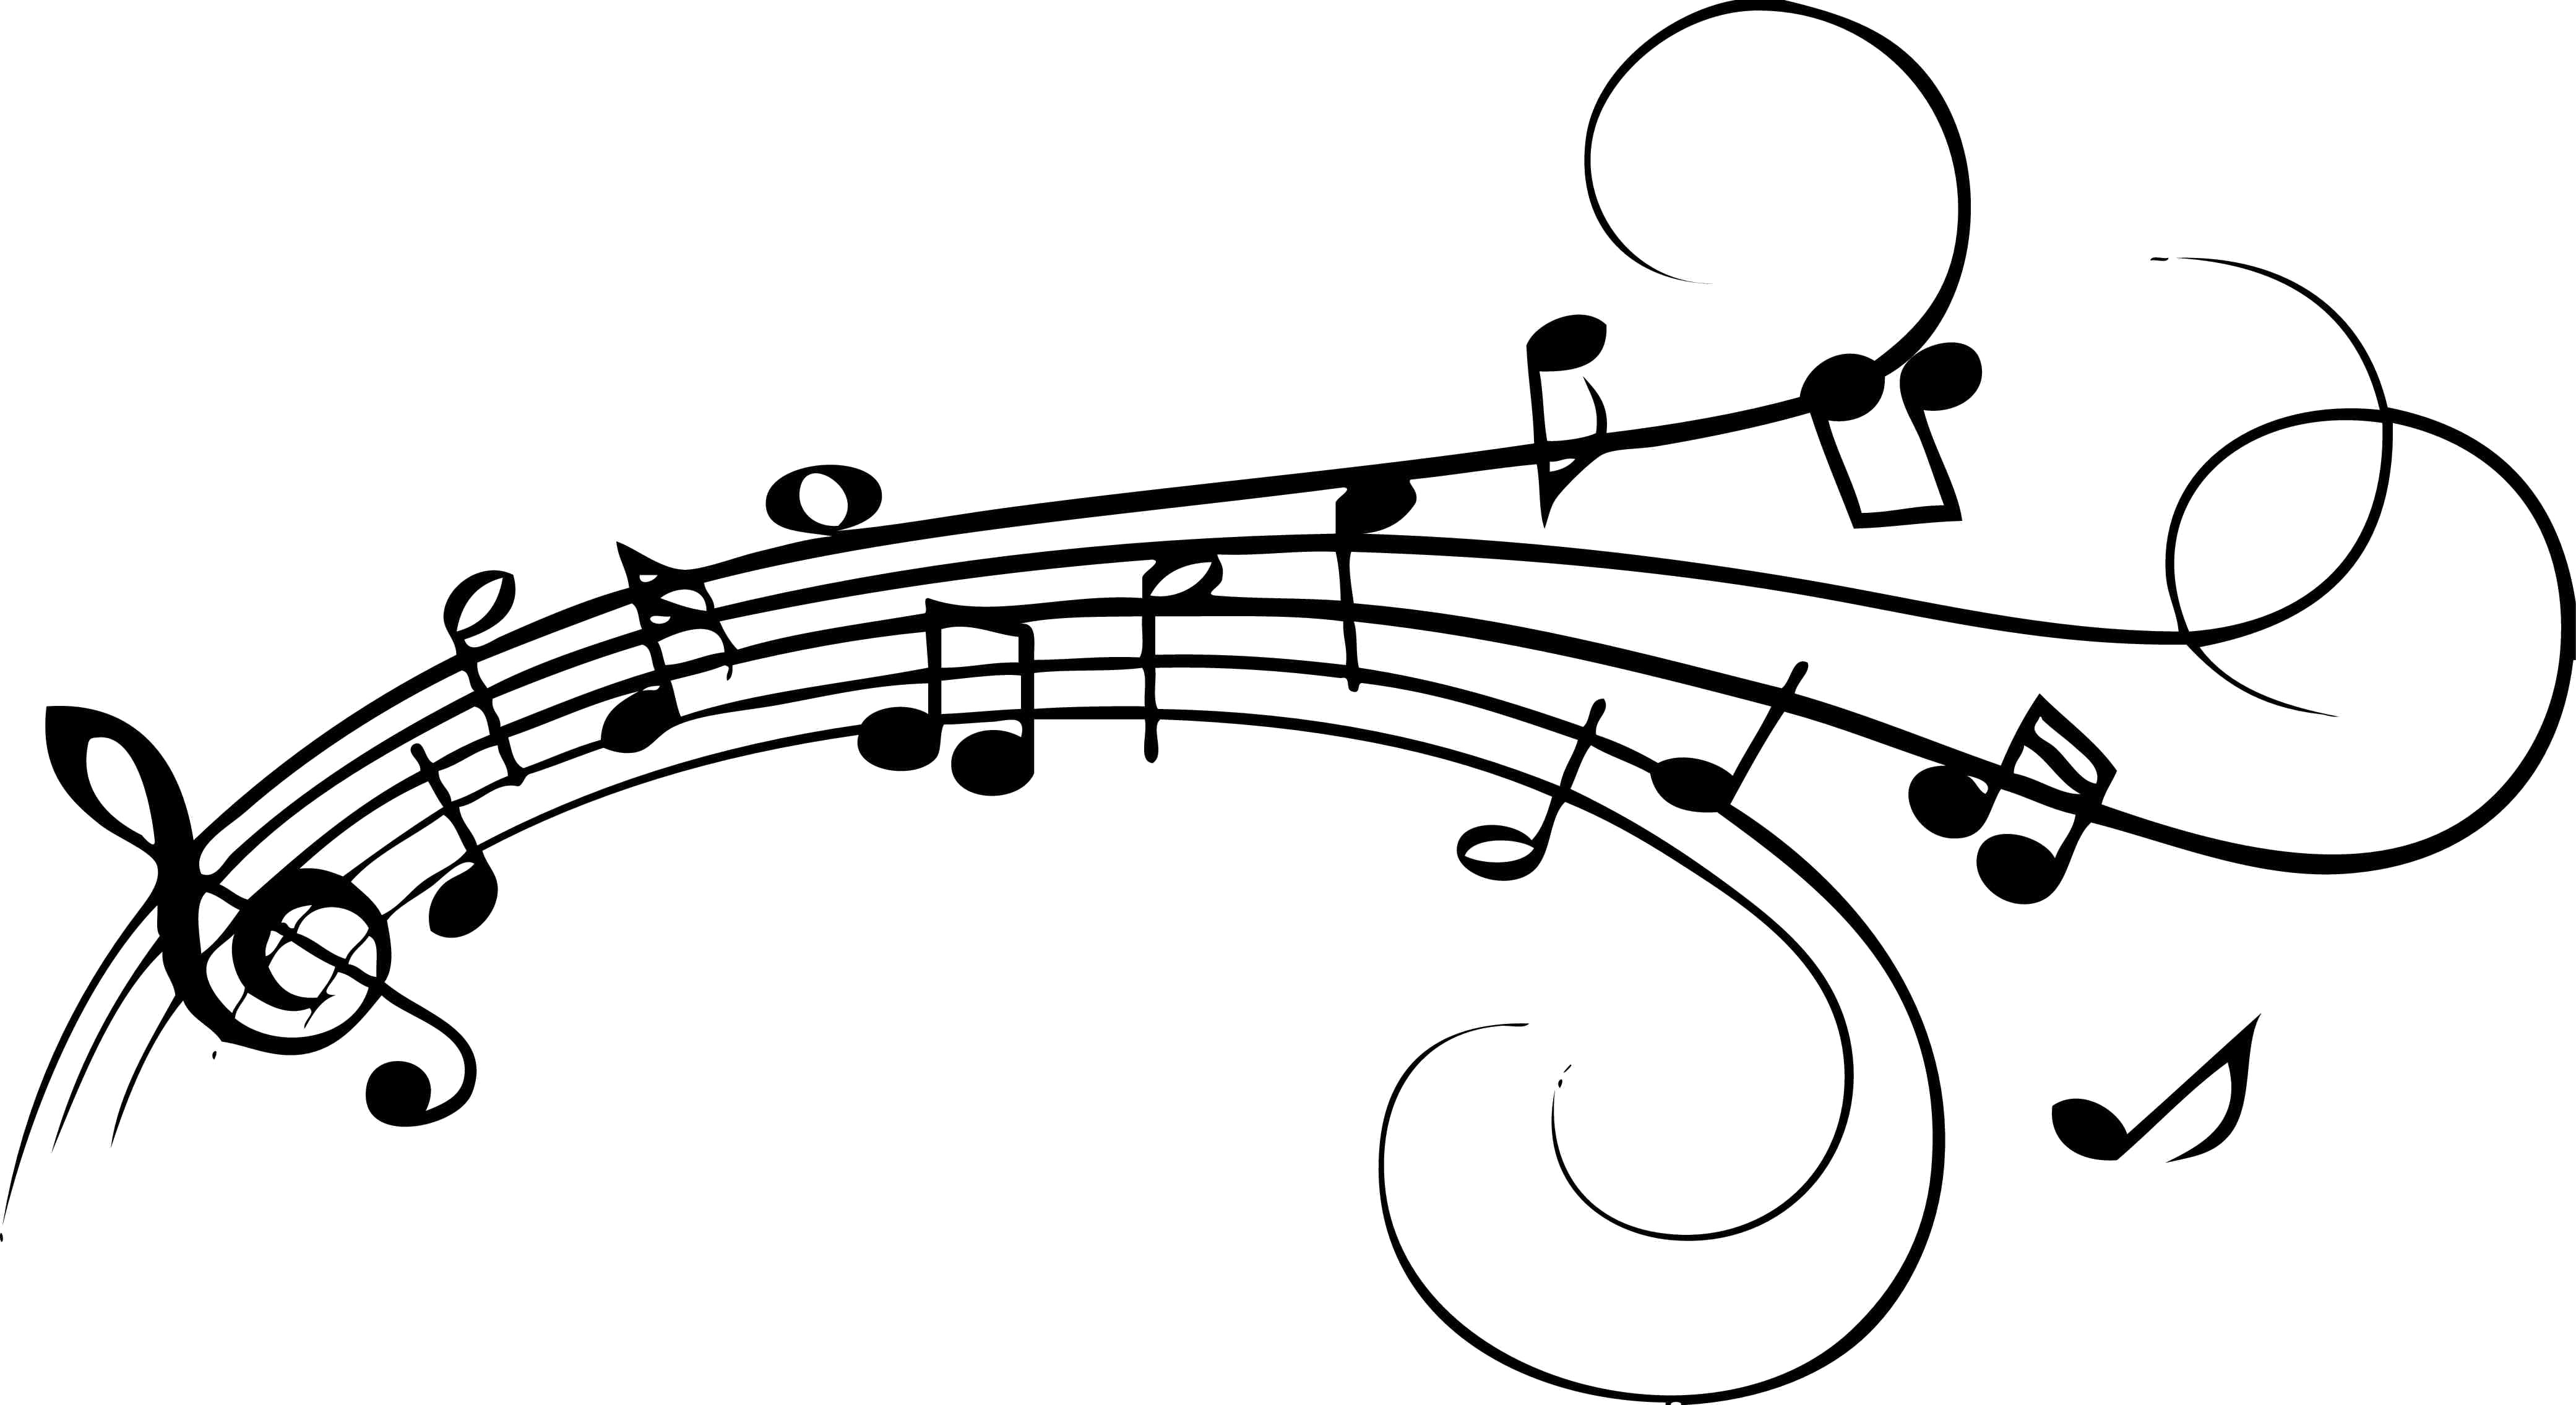 Musical Notation Symbol Image PNG Image High Quality PNG Image